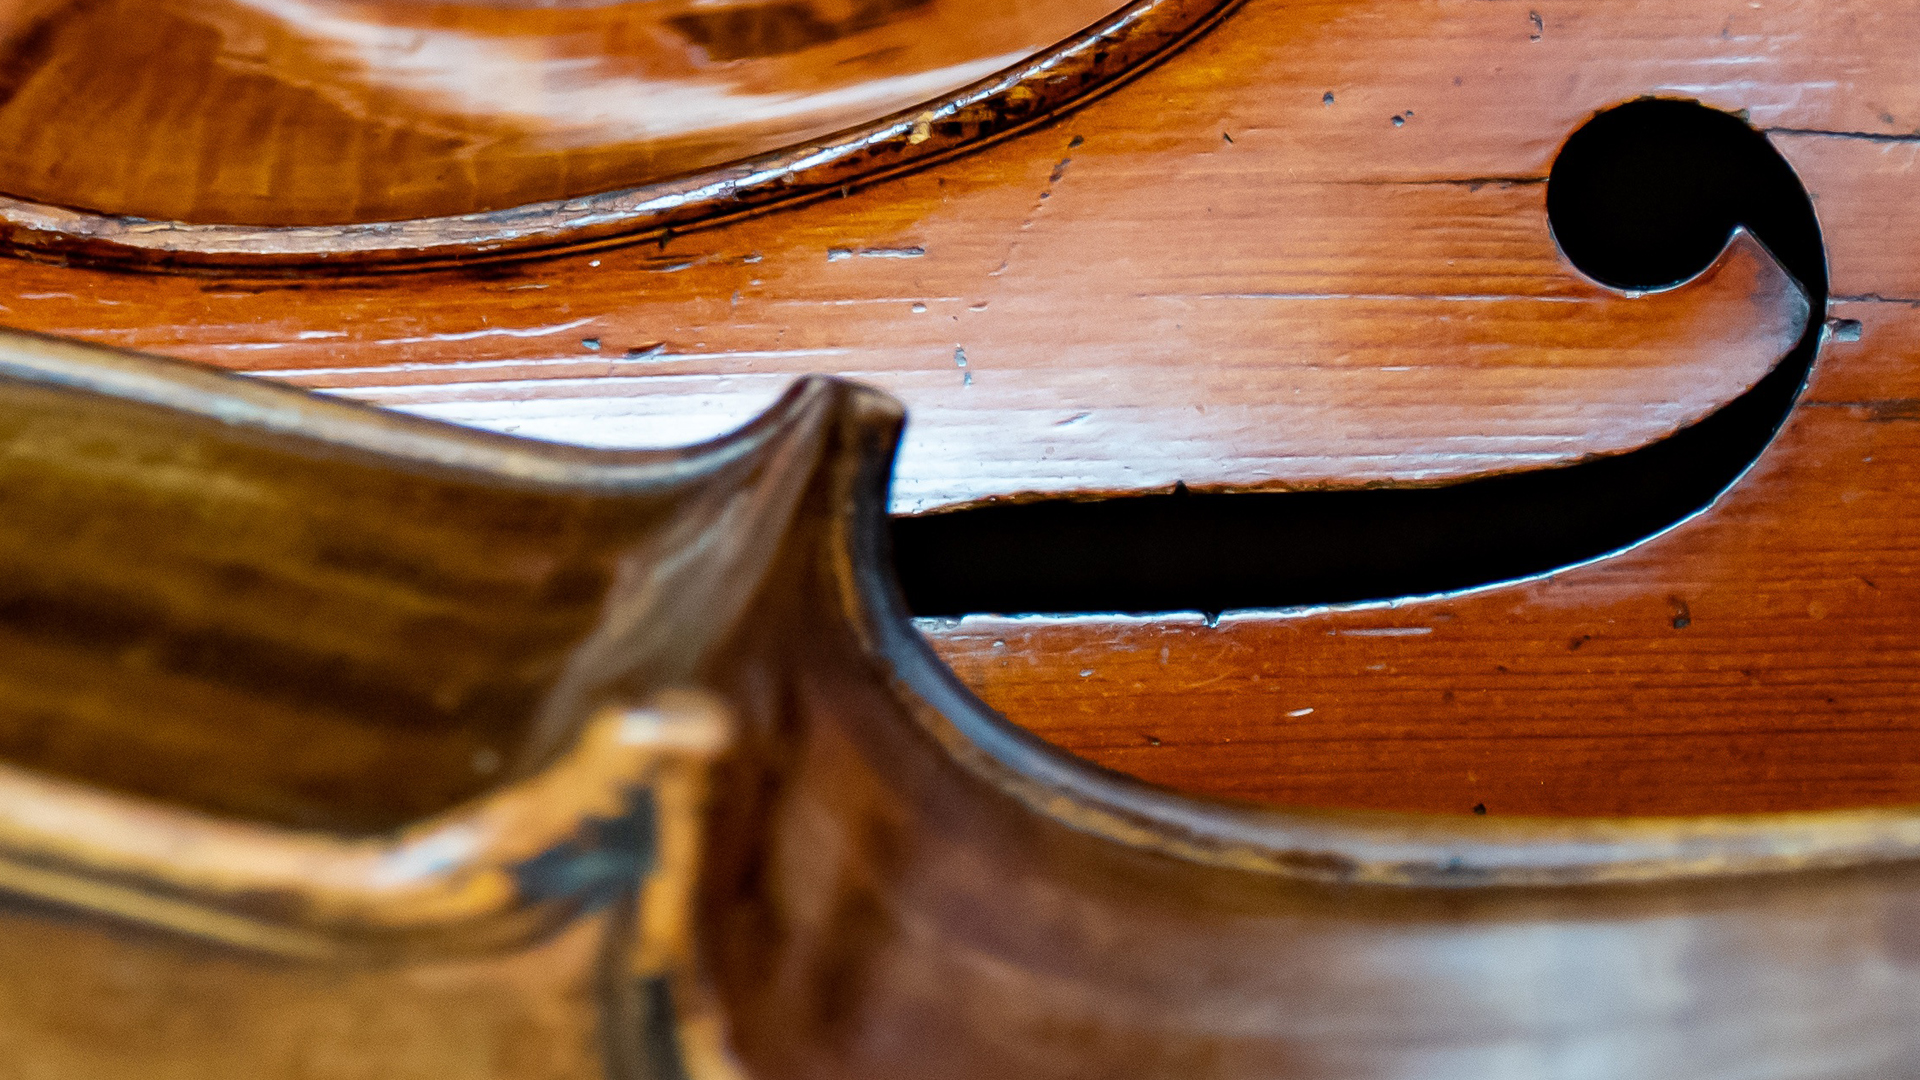 A close up image of two cellos laying side by side